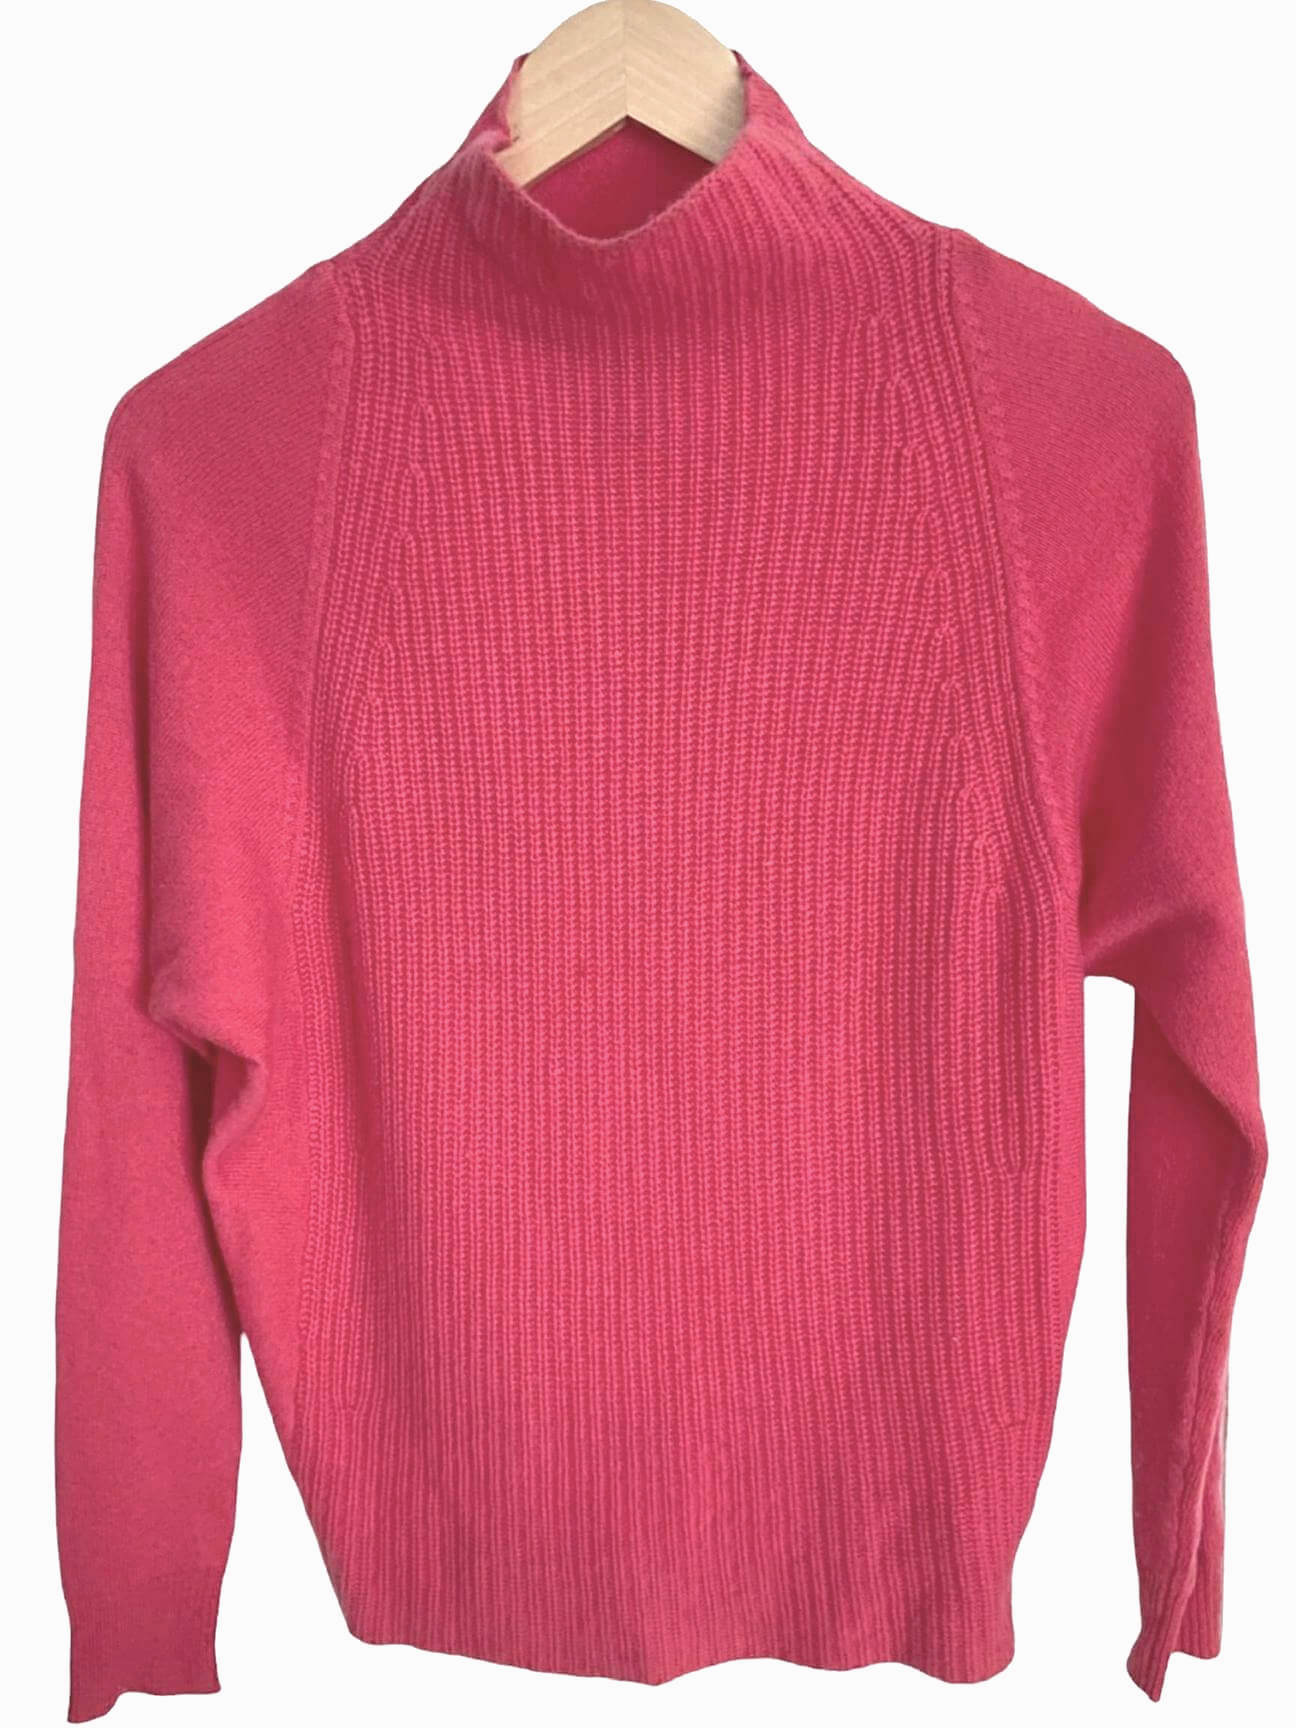 Soft Summer TAHARI pink ribbed cashmere sweater